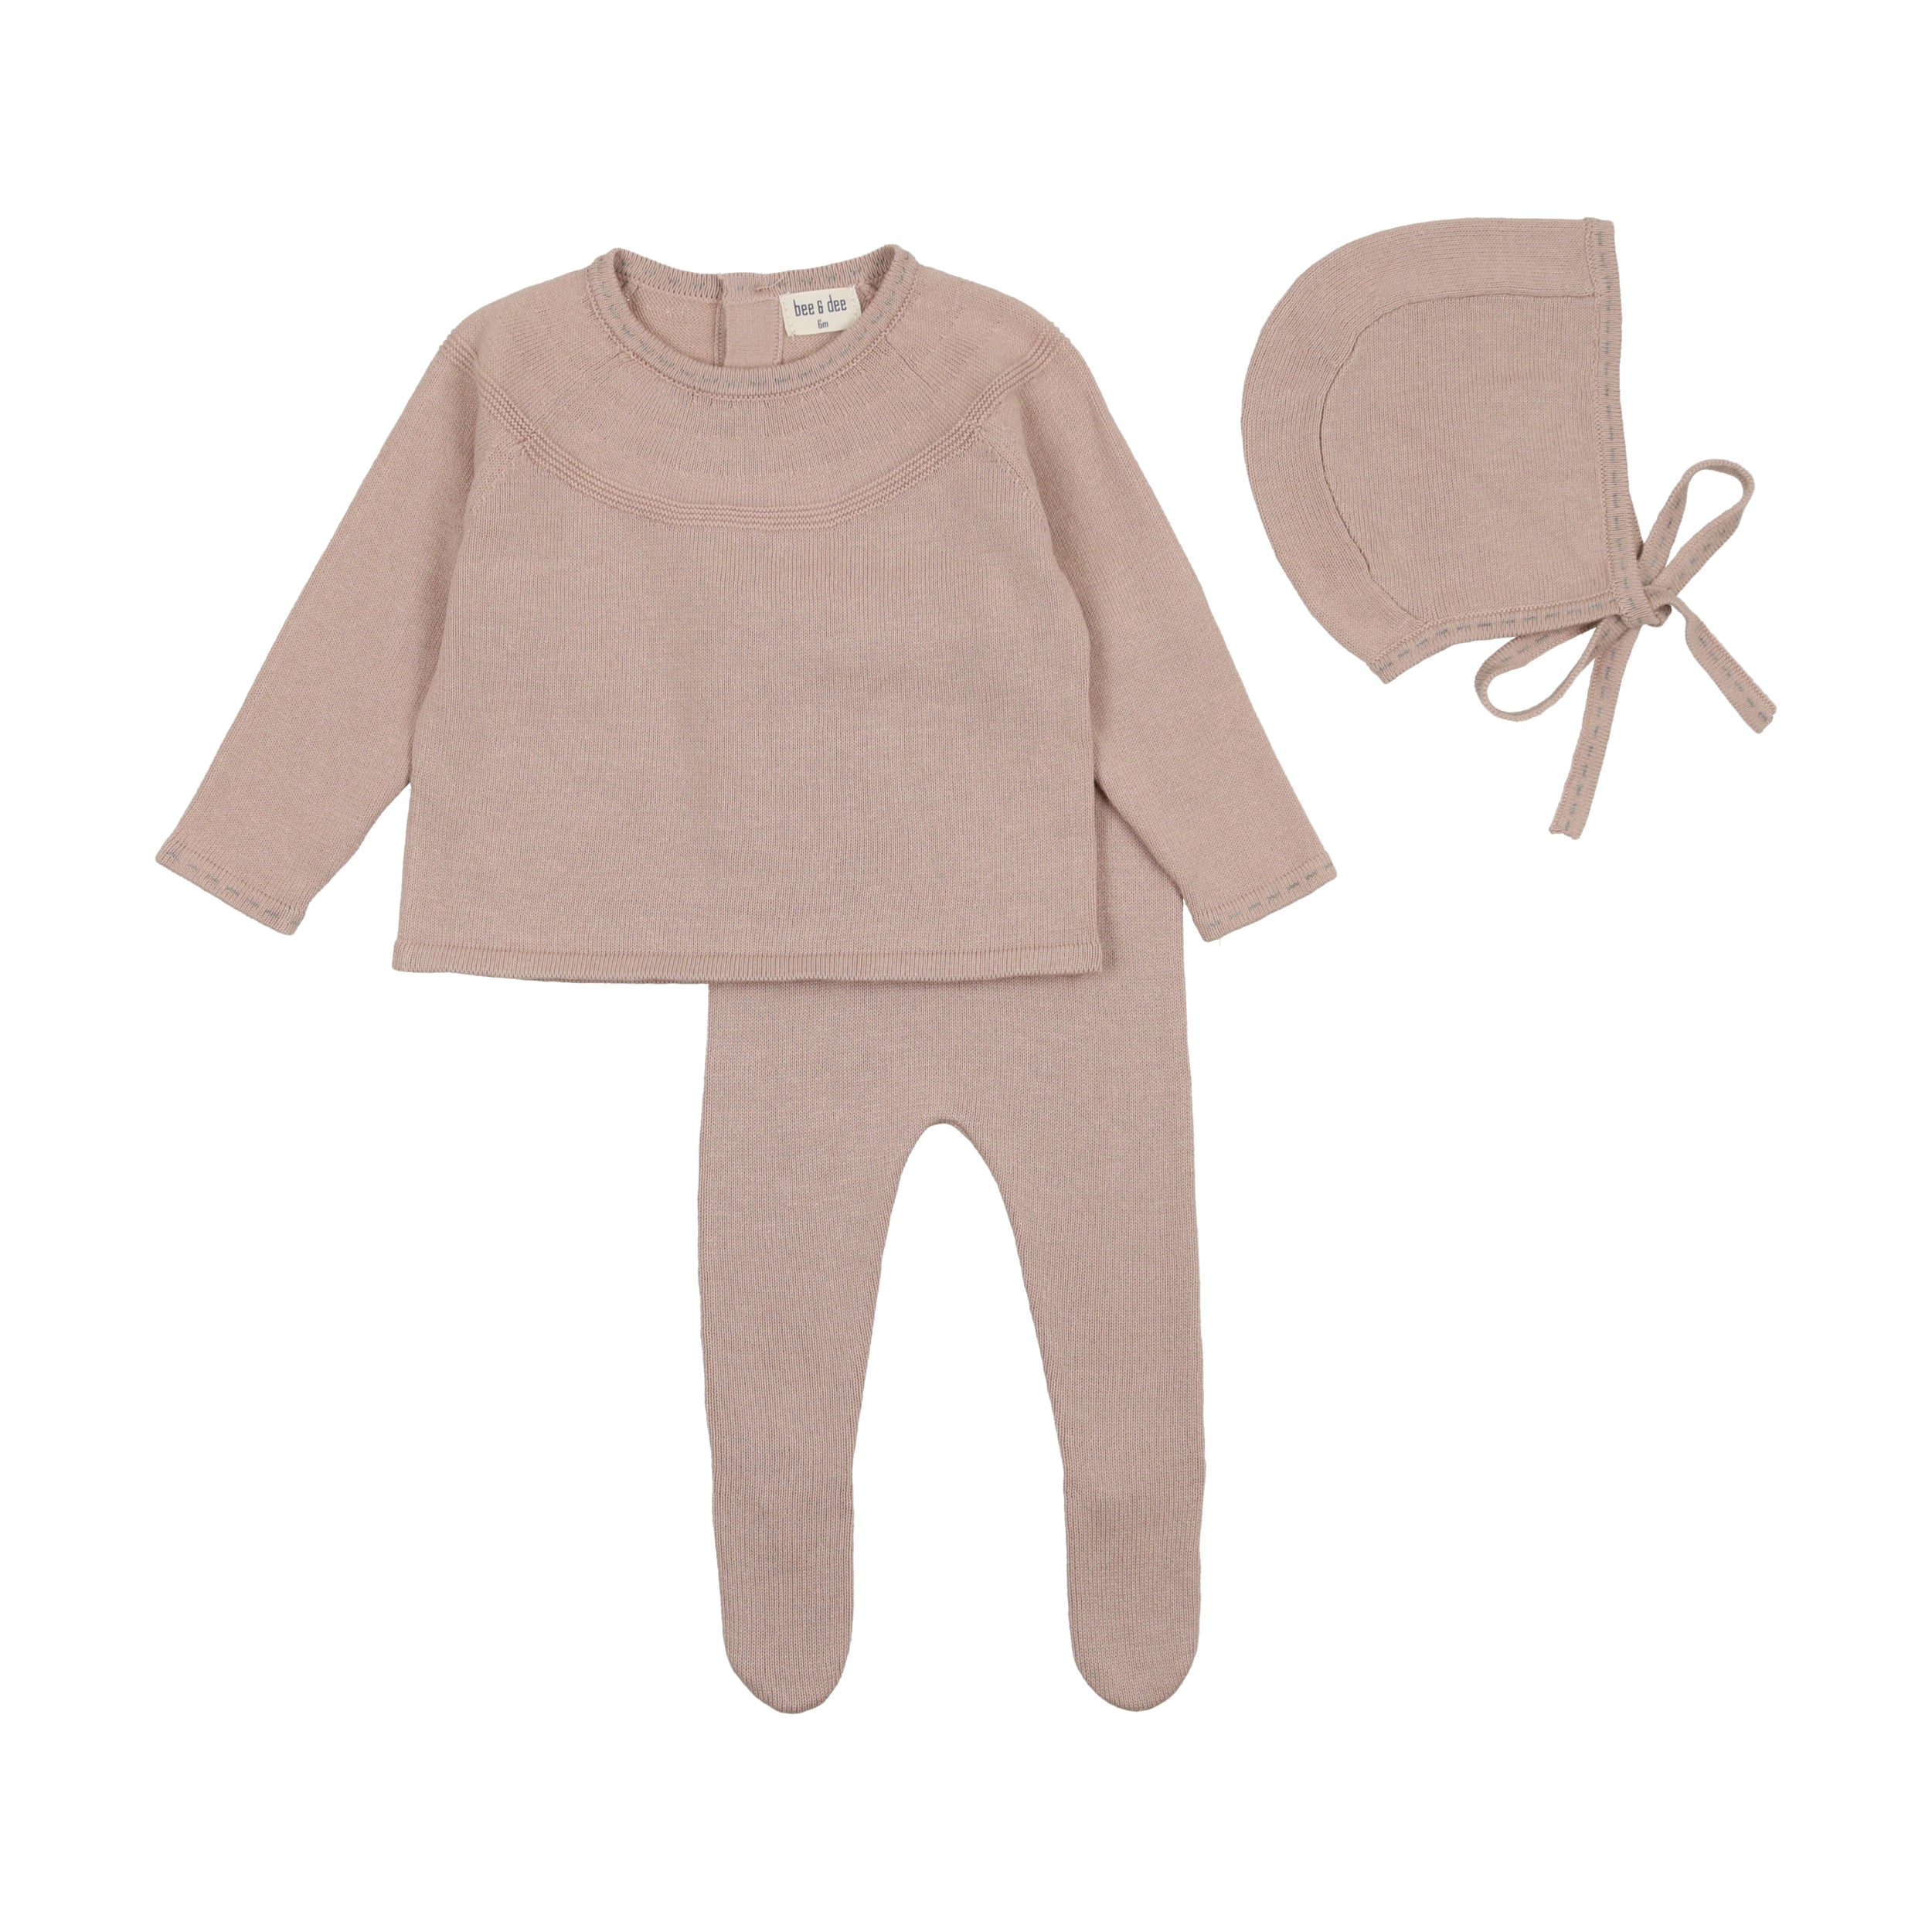 Cinnamon Pink Contrast Stitch Knit Outfit